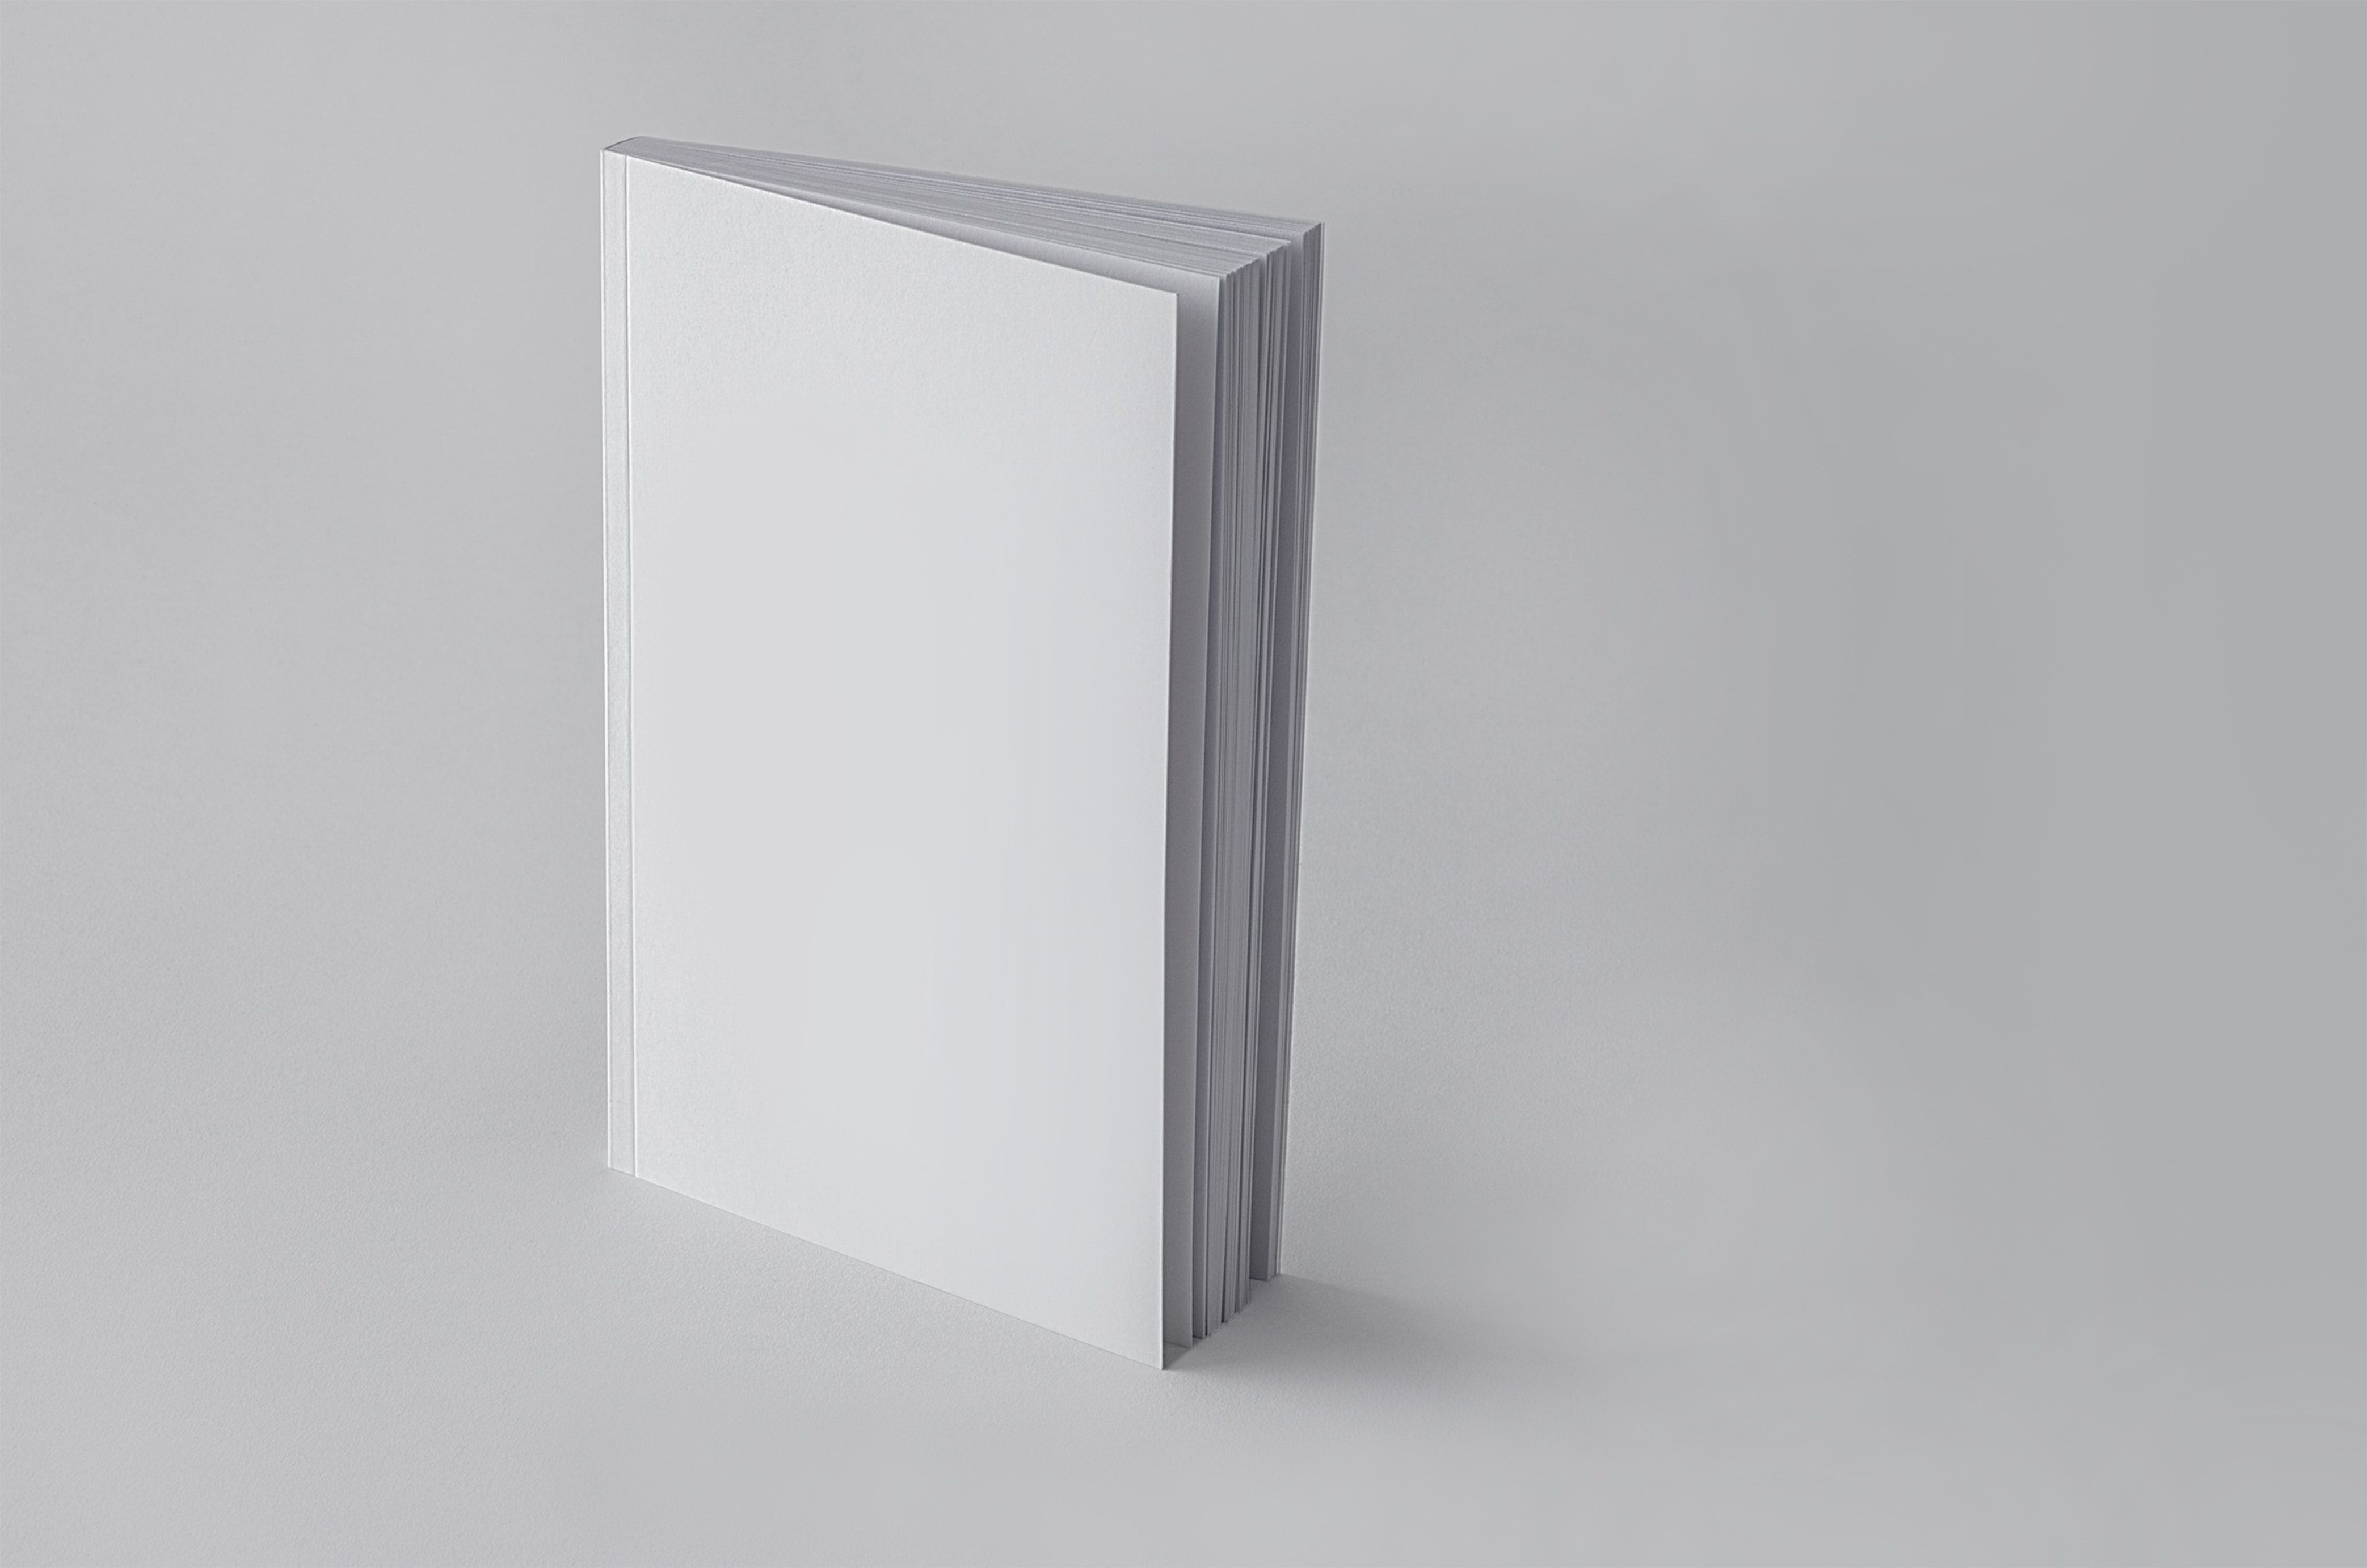 White book standing on a white surface